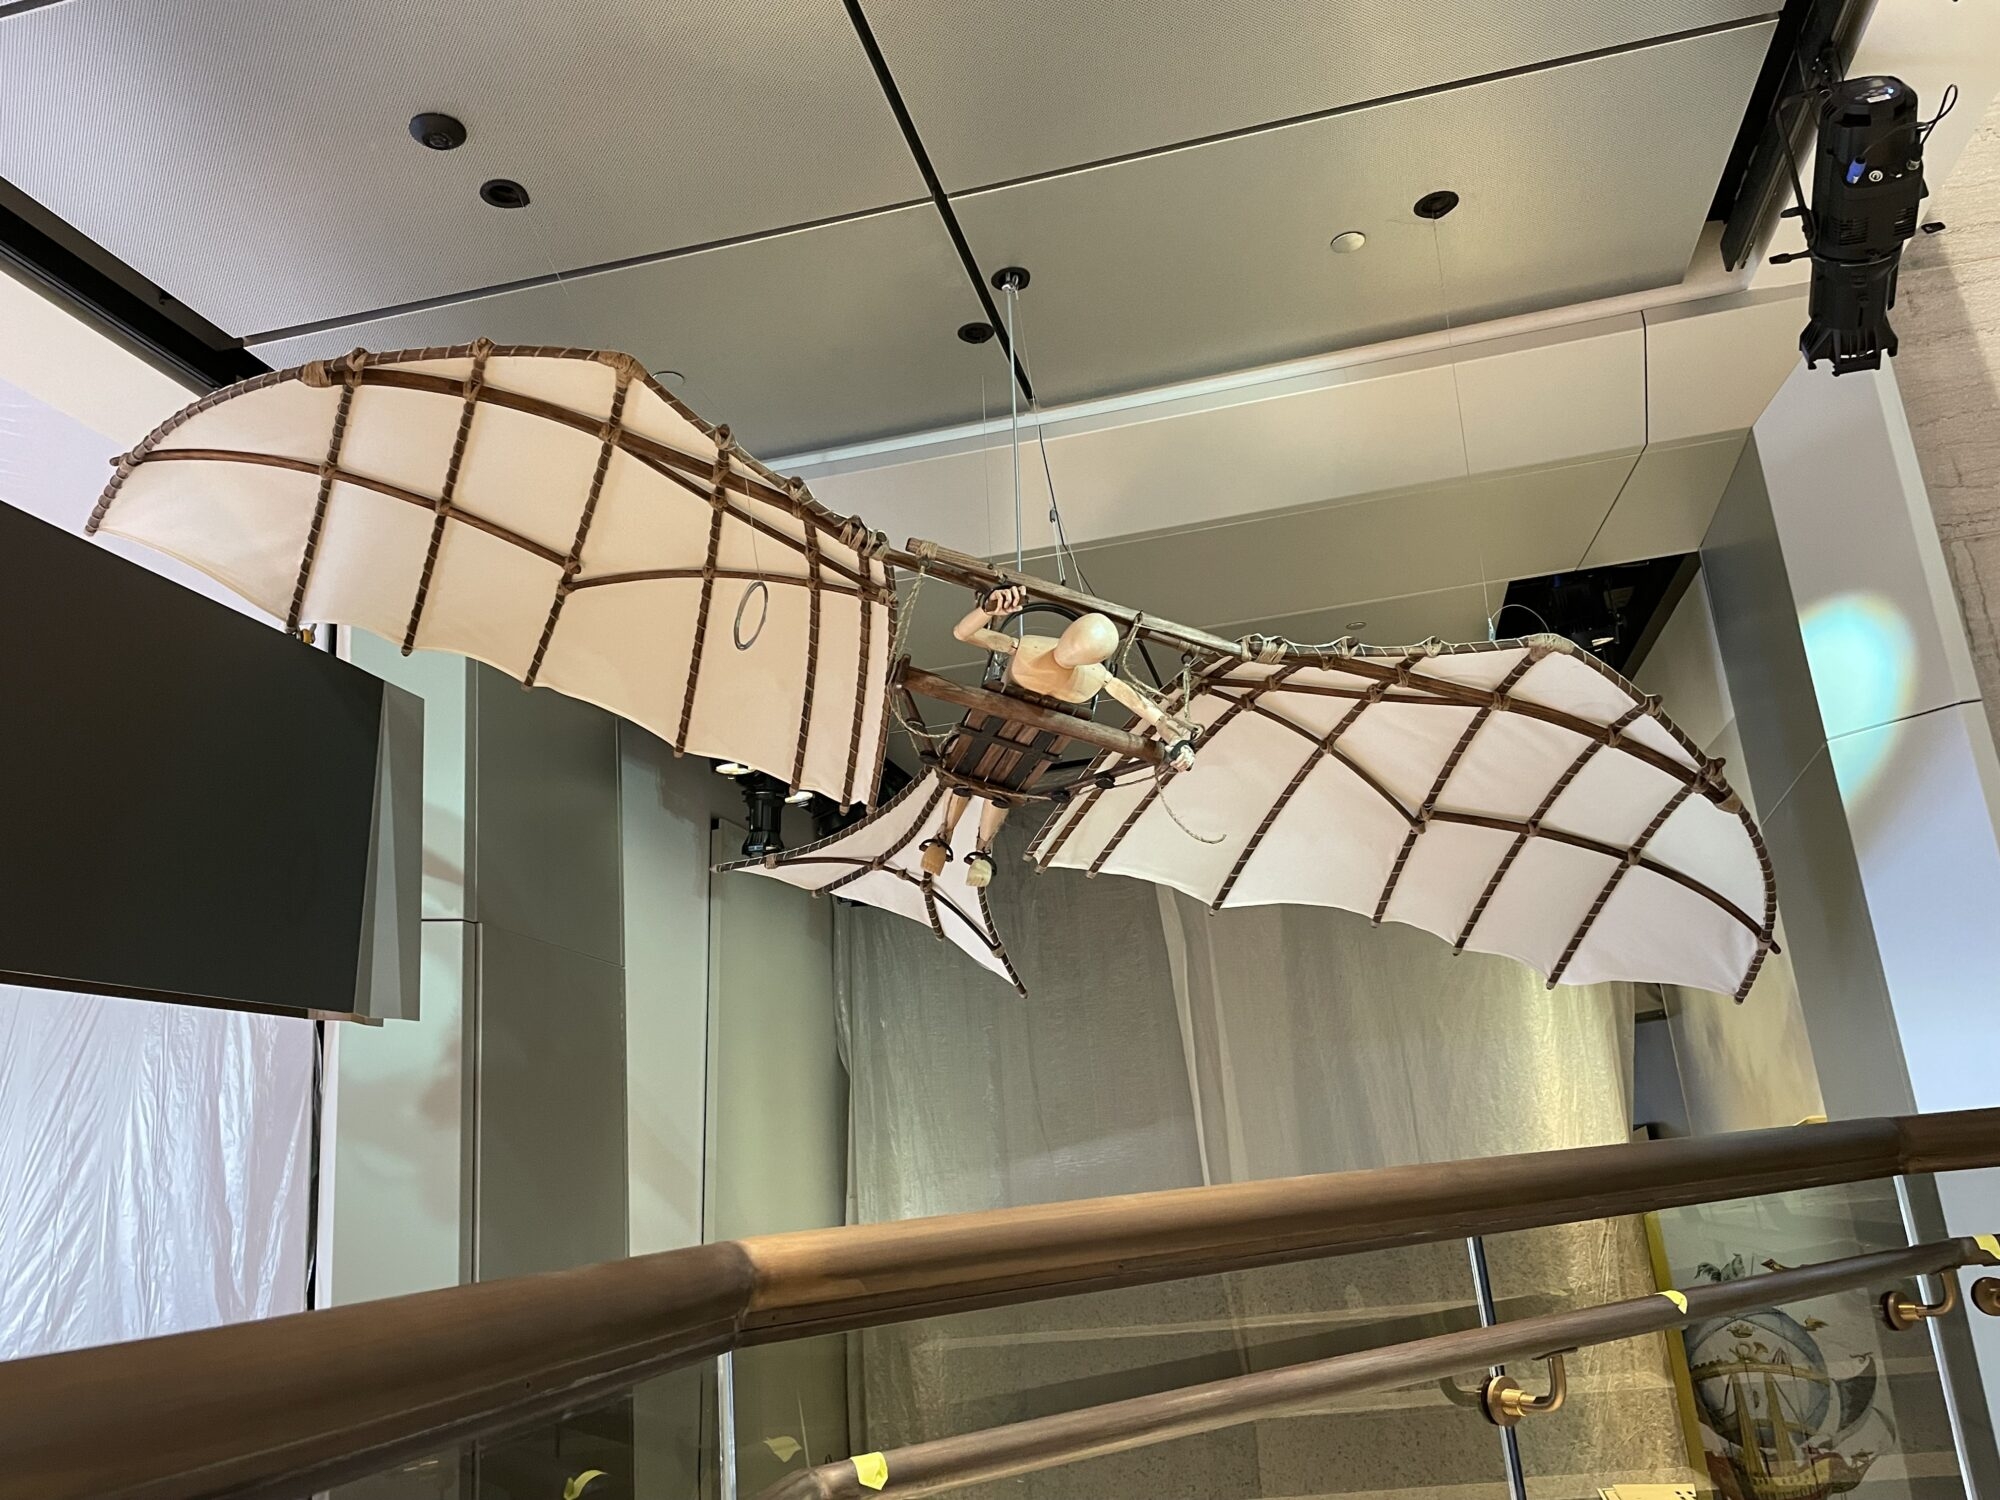 A photo of anornithopter hanging in the Smithsonian.